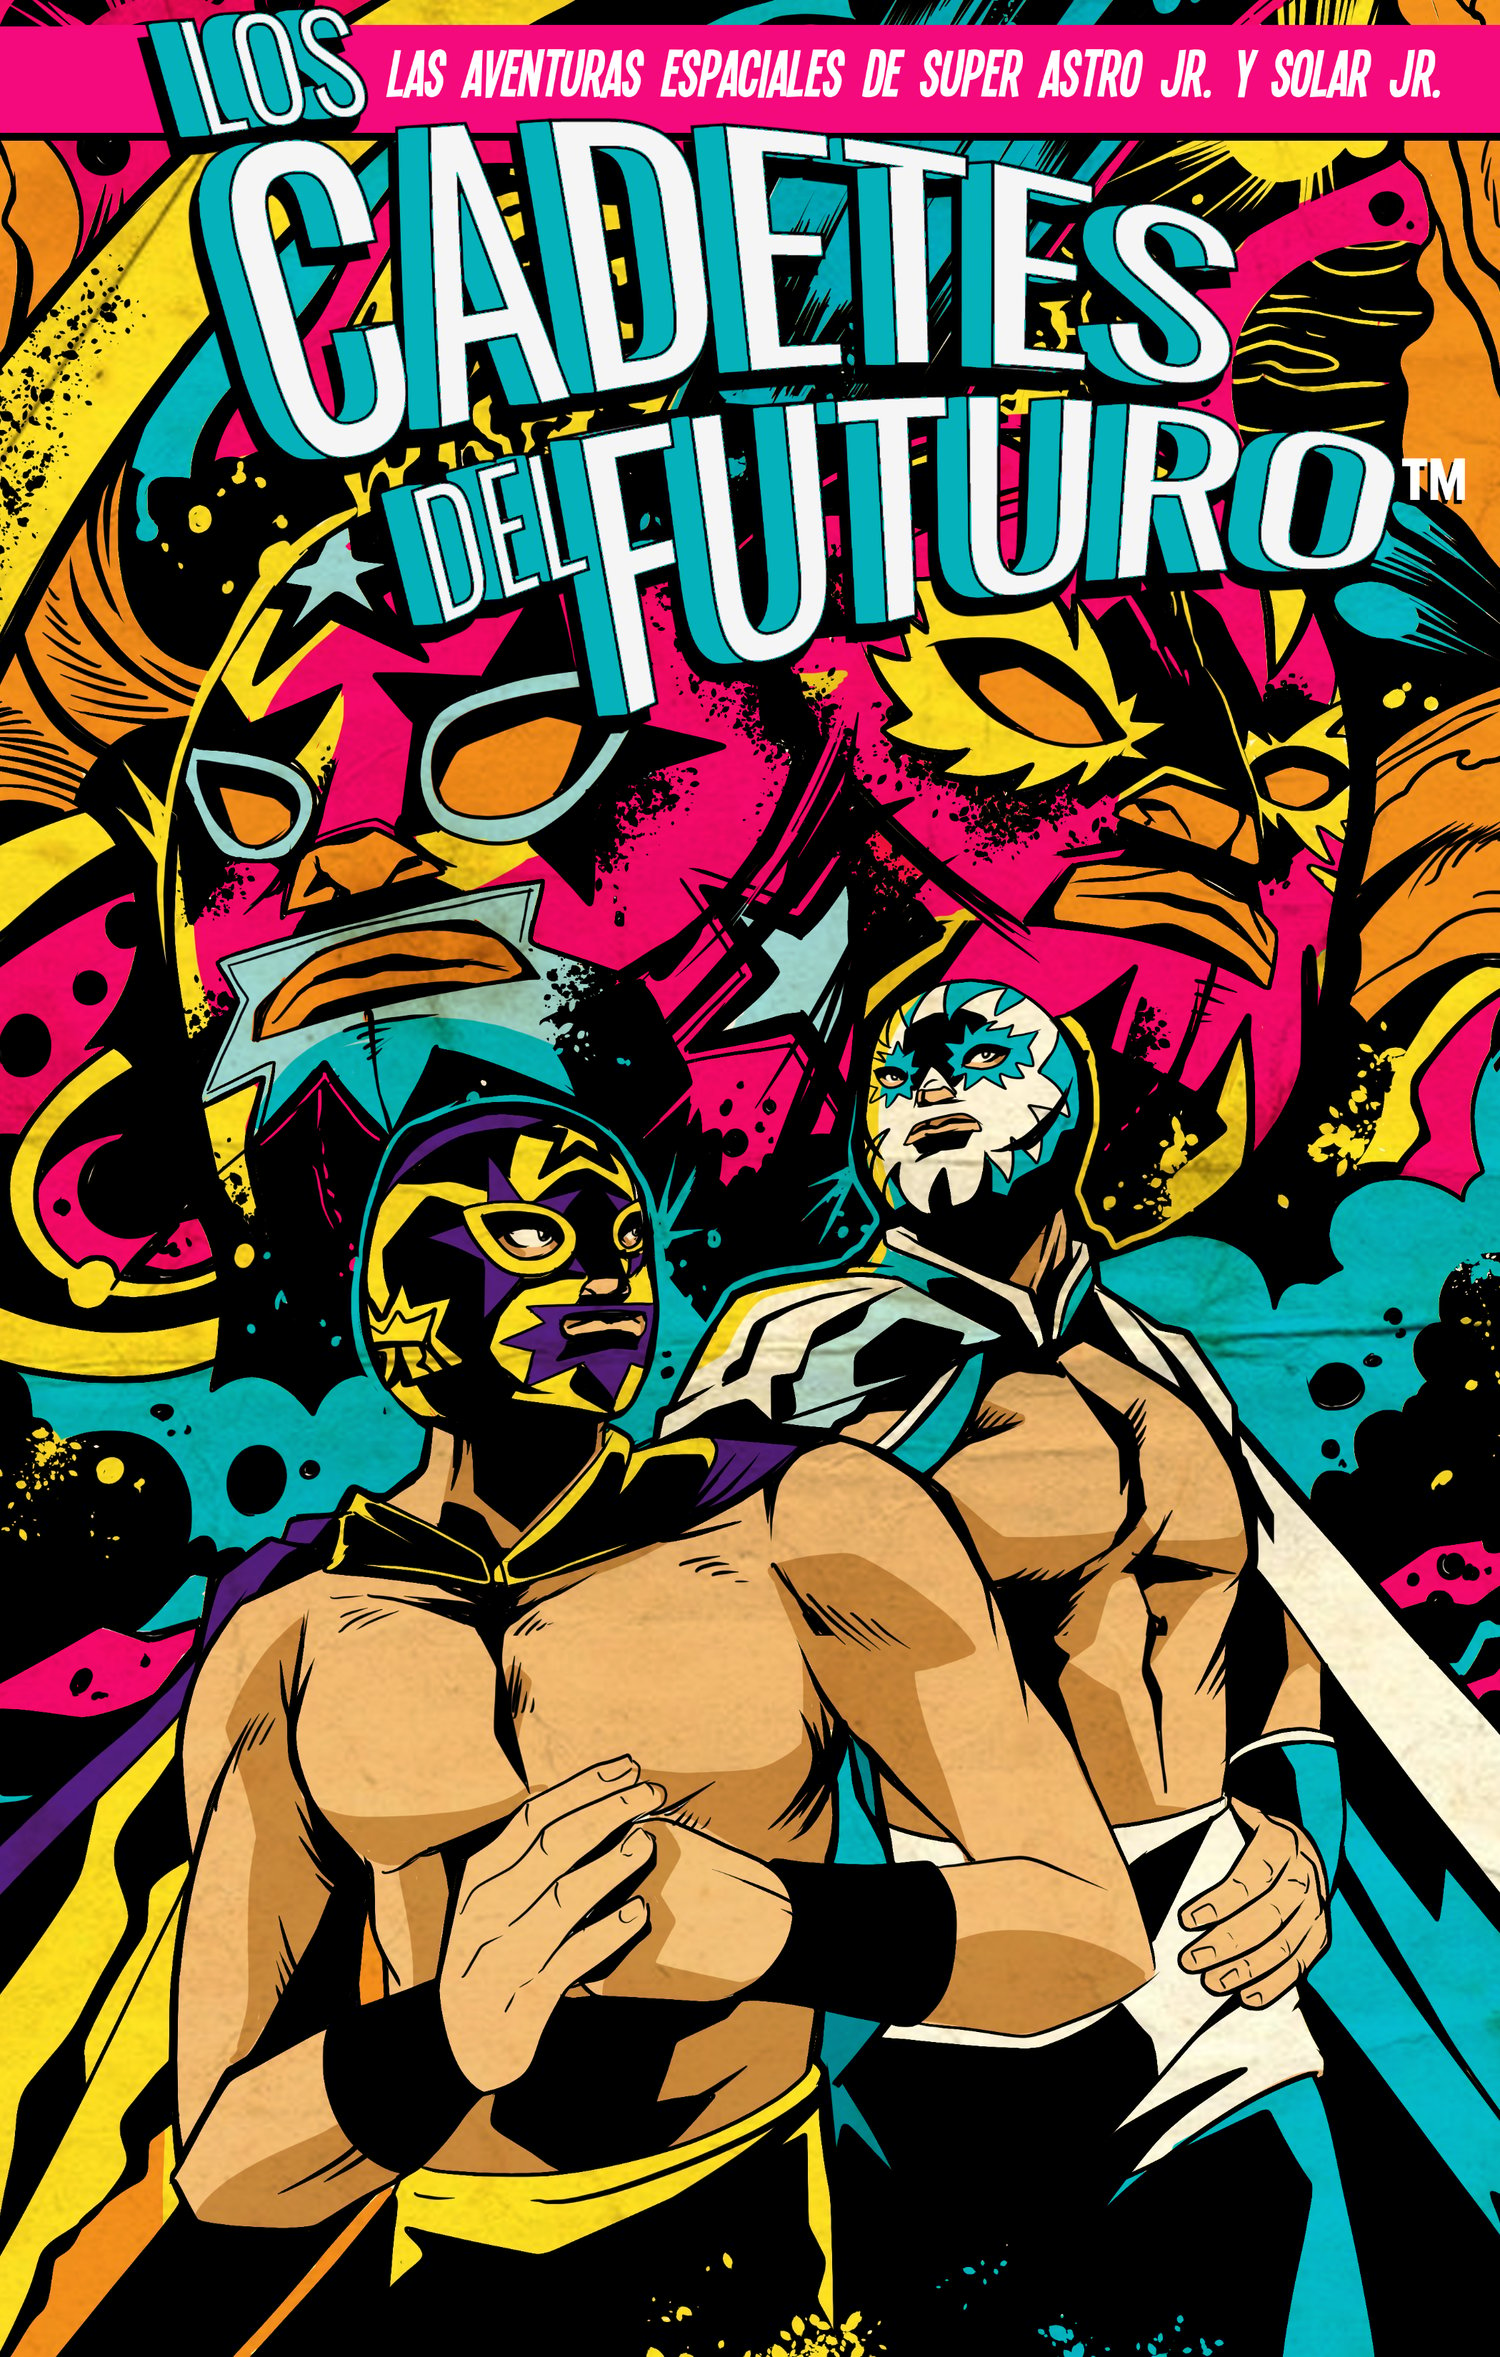 Image of ** LIMITED & NUMBERED ** 1st ever Los Cadetes del Futuro™ Illustration Art Print by Napalm